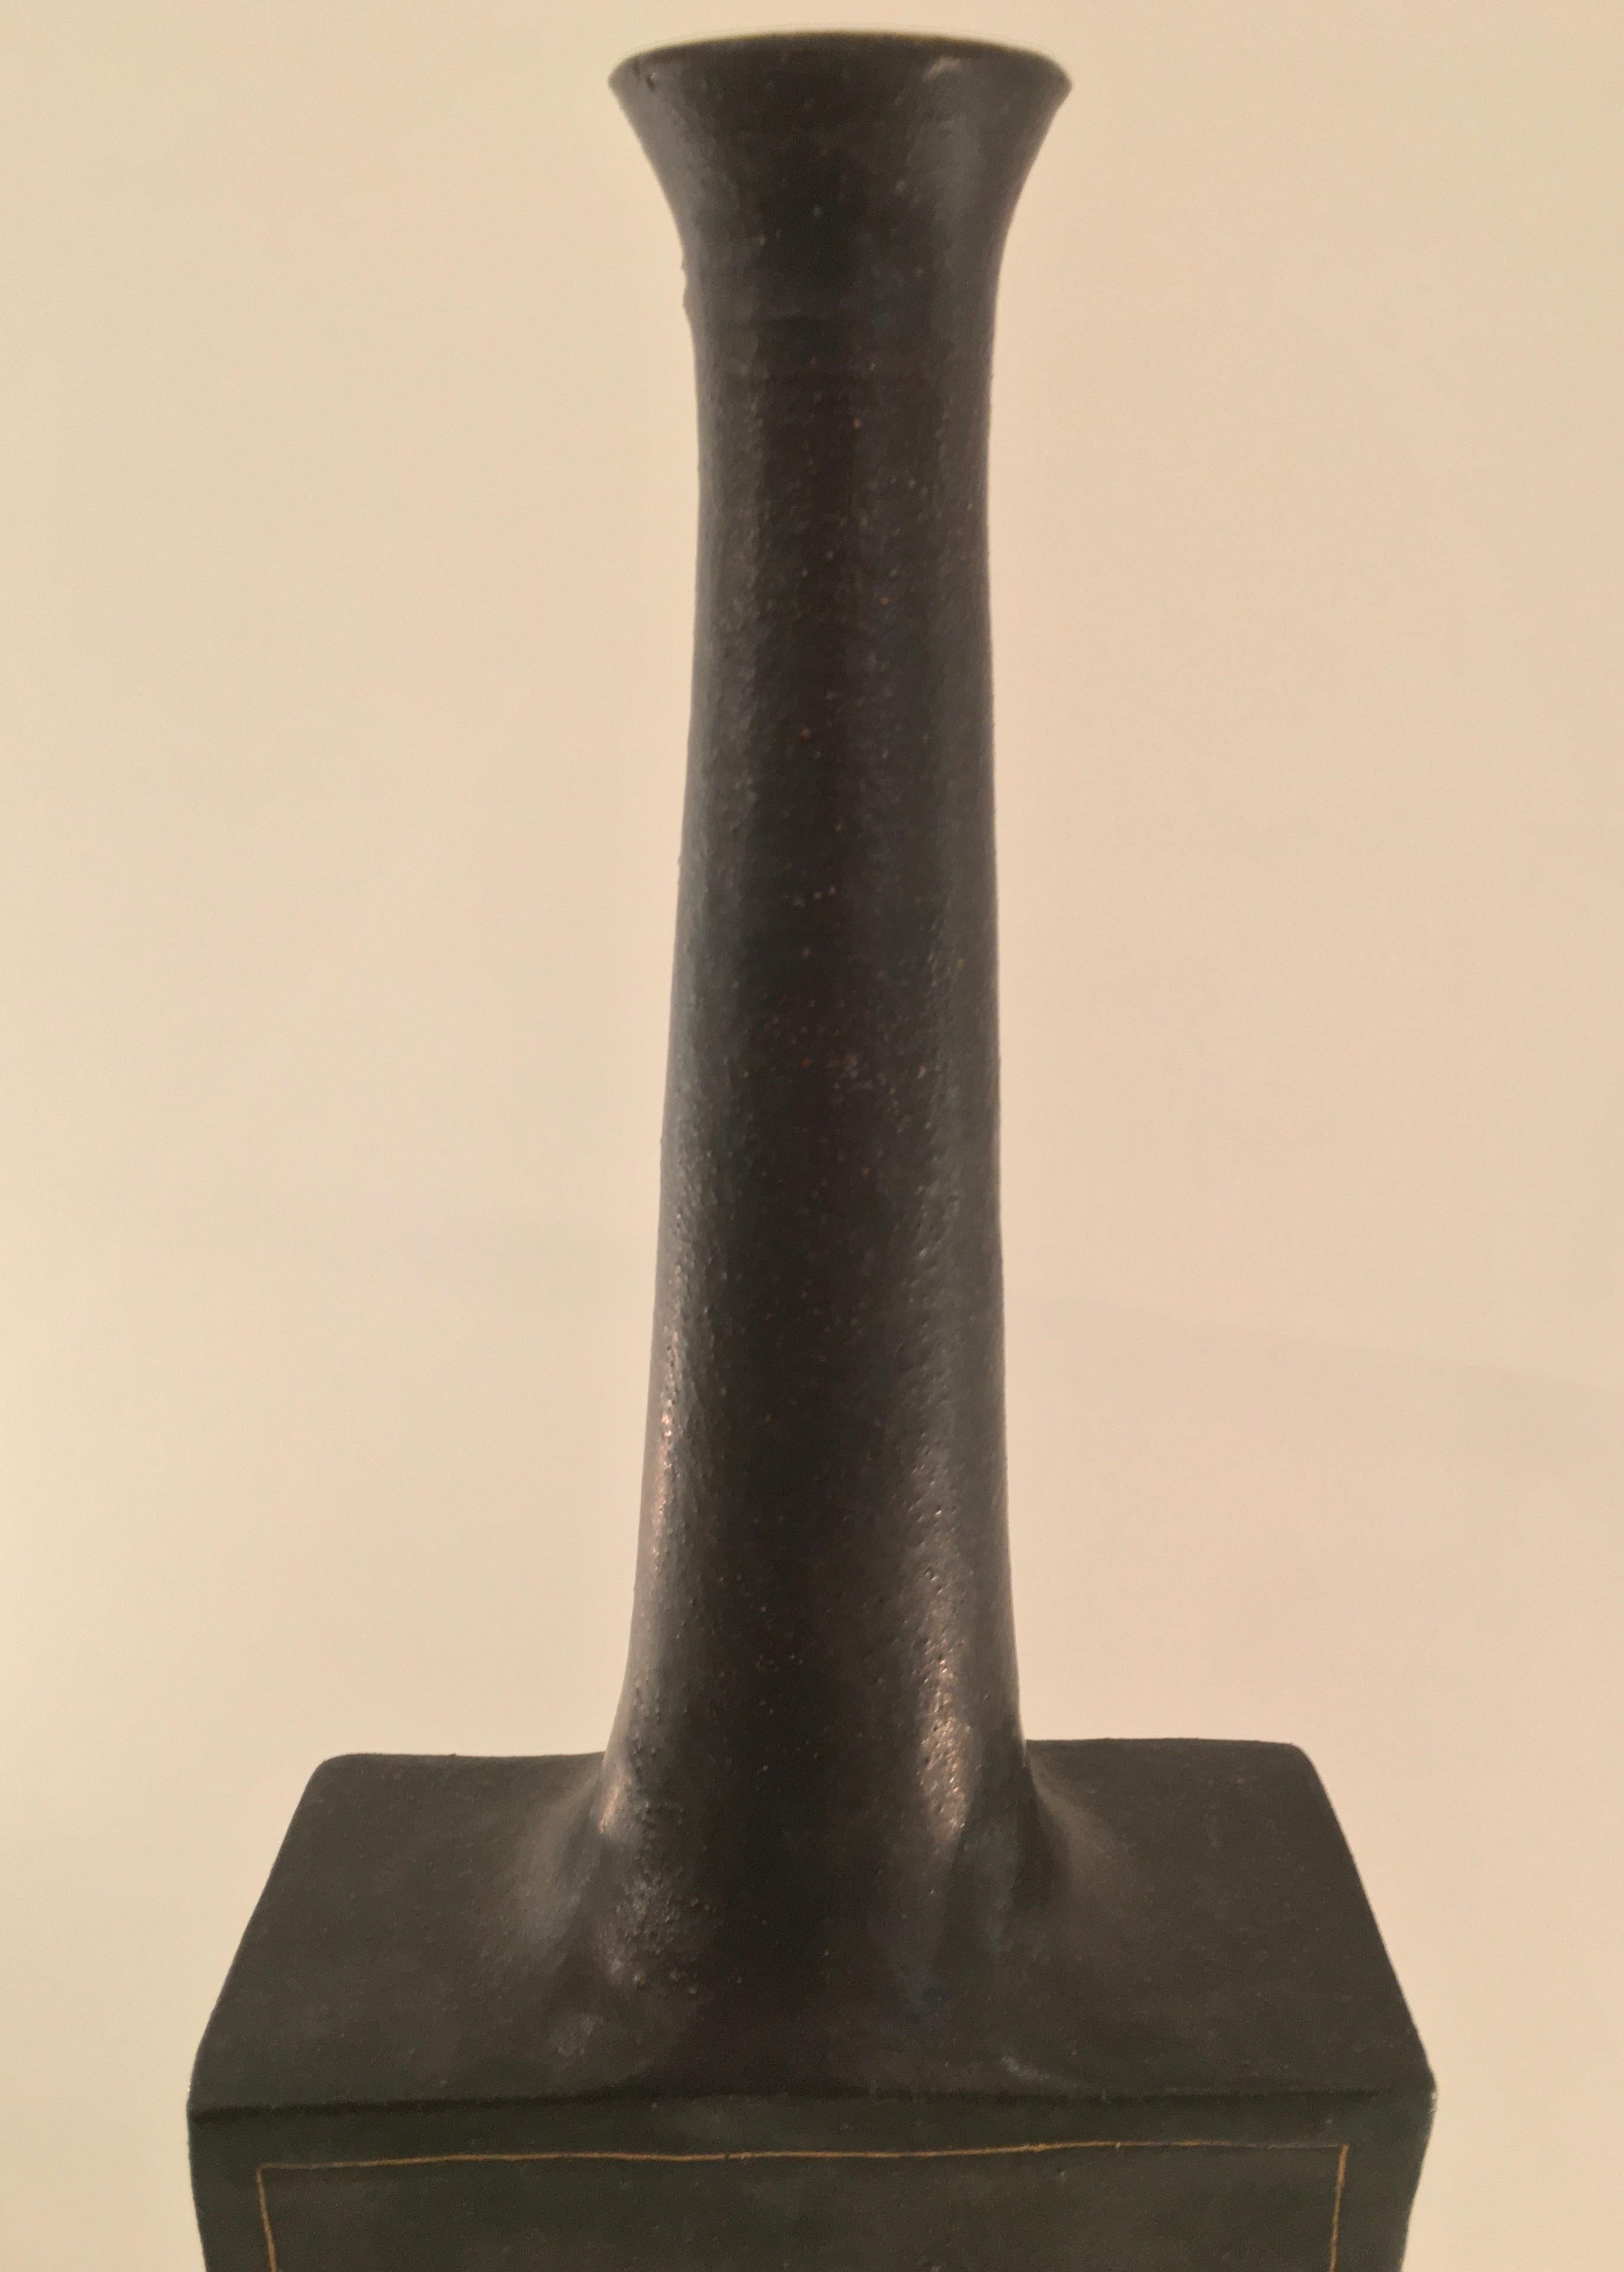 A dark grey glazed ceramic vase with gold detailing by Florentine ceramicist, Bruno Gambone. Designed and produced in the early 1970s, this earthenware rectangular vase with elongated neck is synonymous with Bruno's paired down, minimalist style.